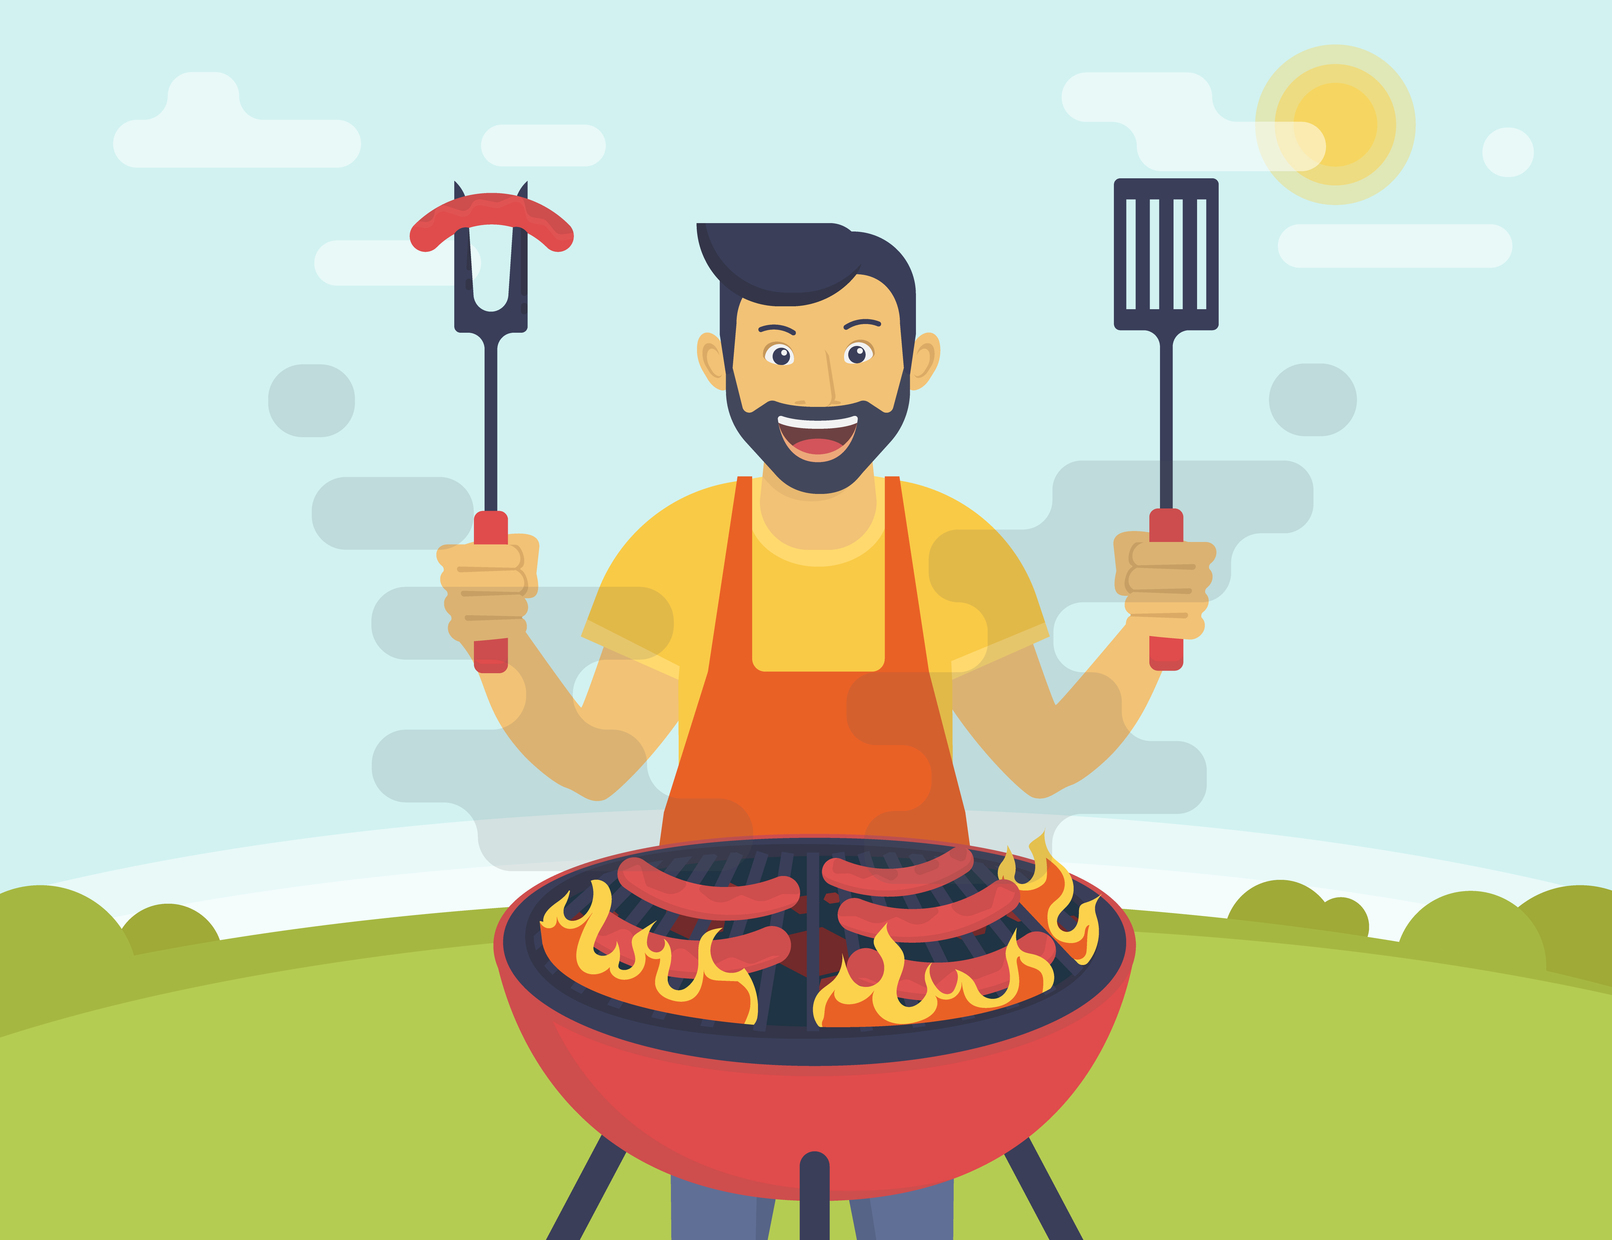 Funny hipster wearing beard is cooking bbq for his friends.